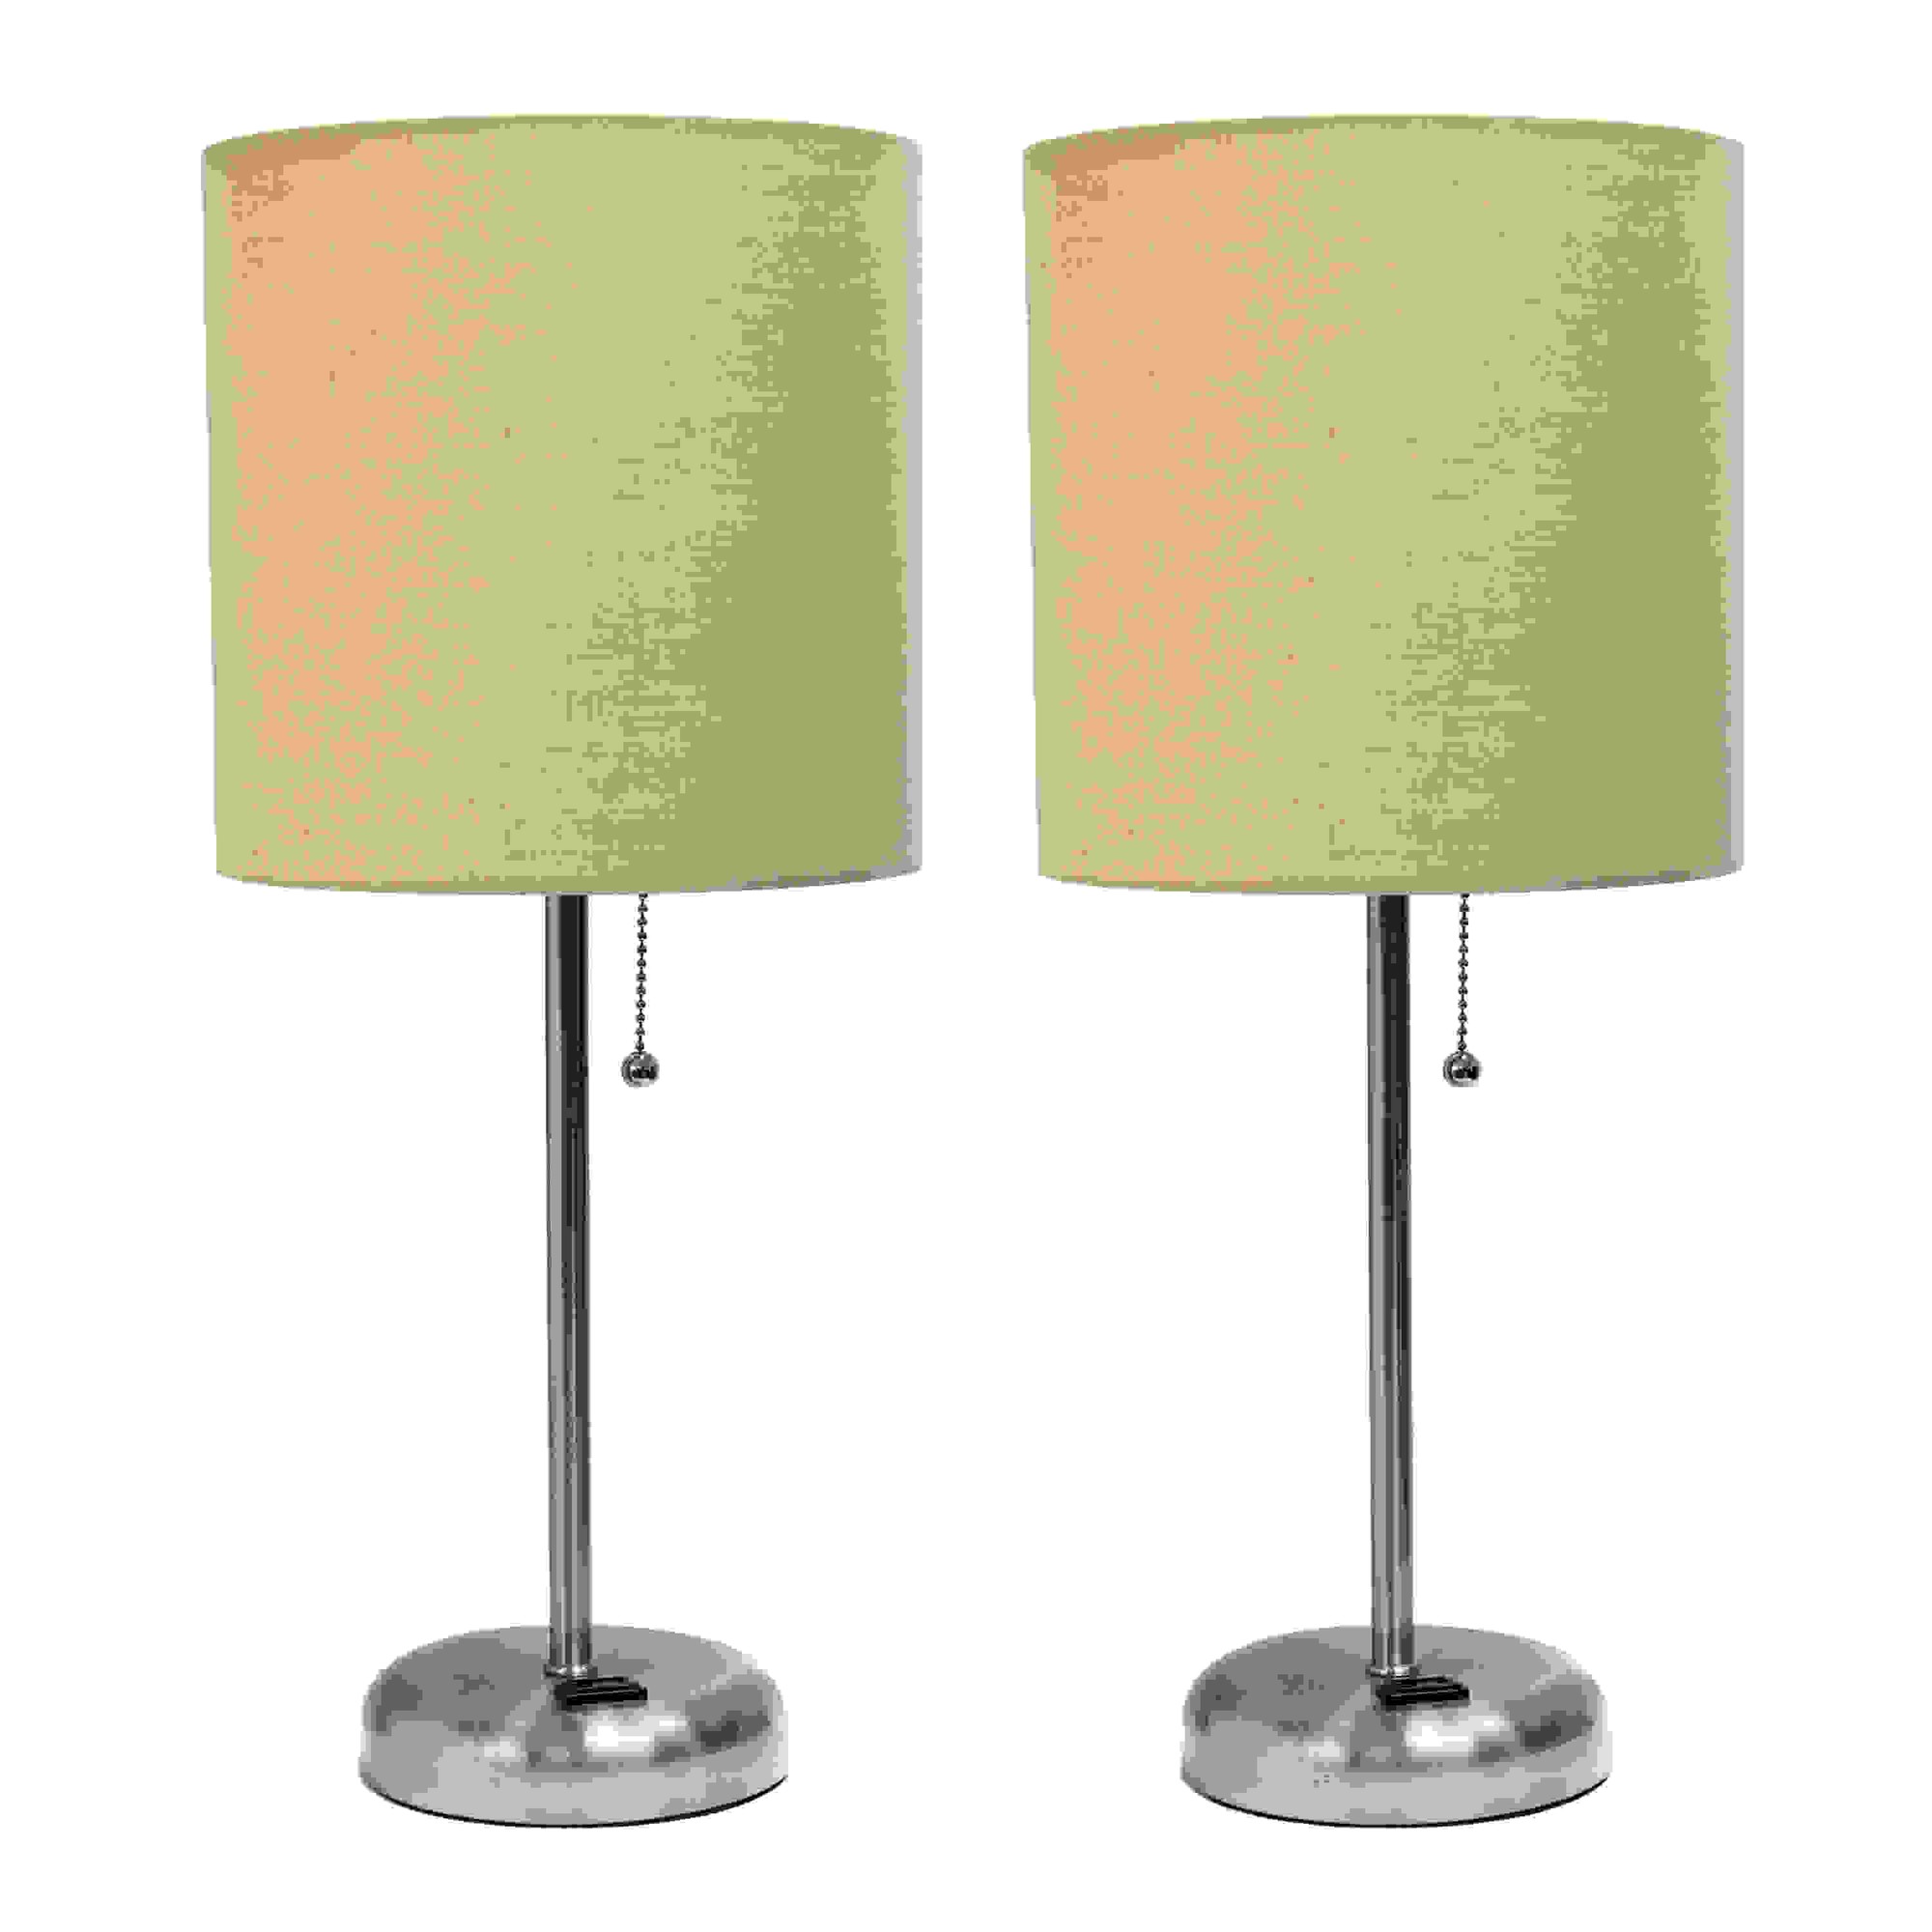 Simple Designs Brushed Steel Stick Lamp with Charging Outlet and Fabric Shade 2 Pack Set, Tan